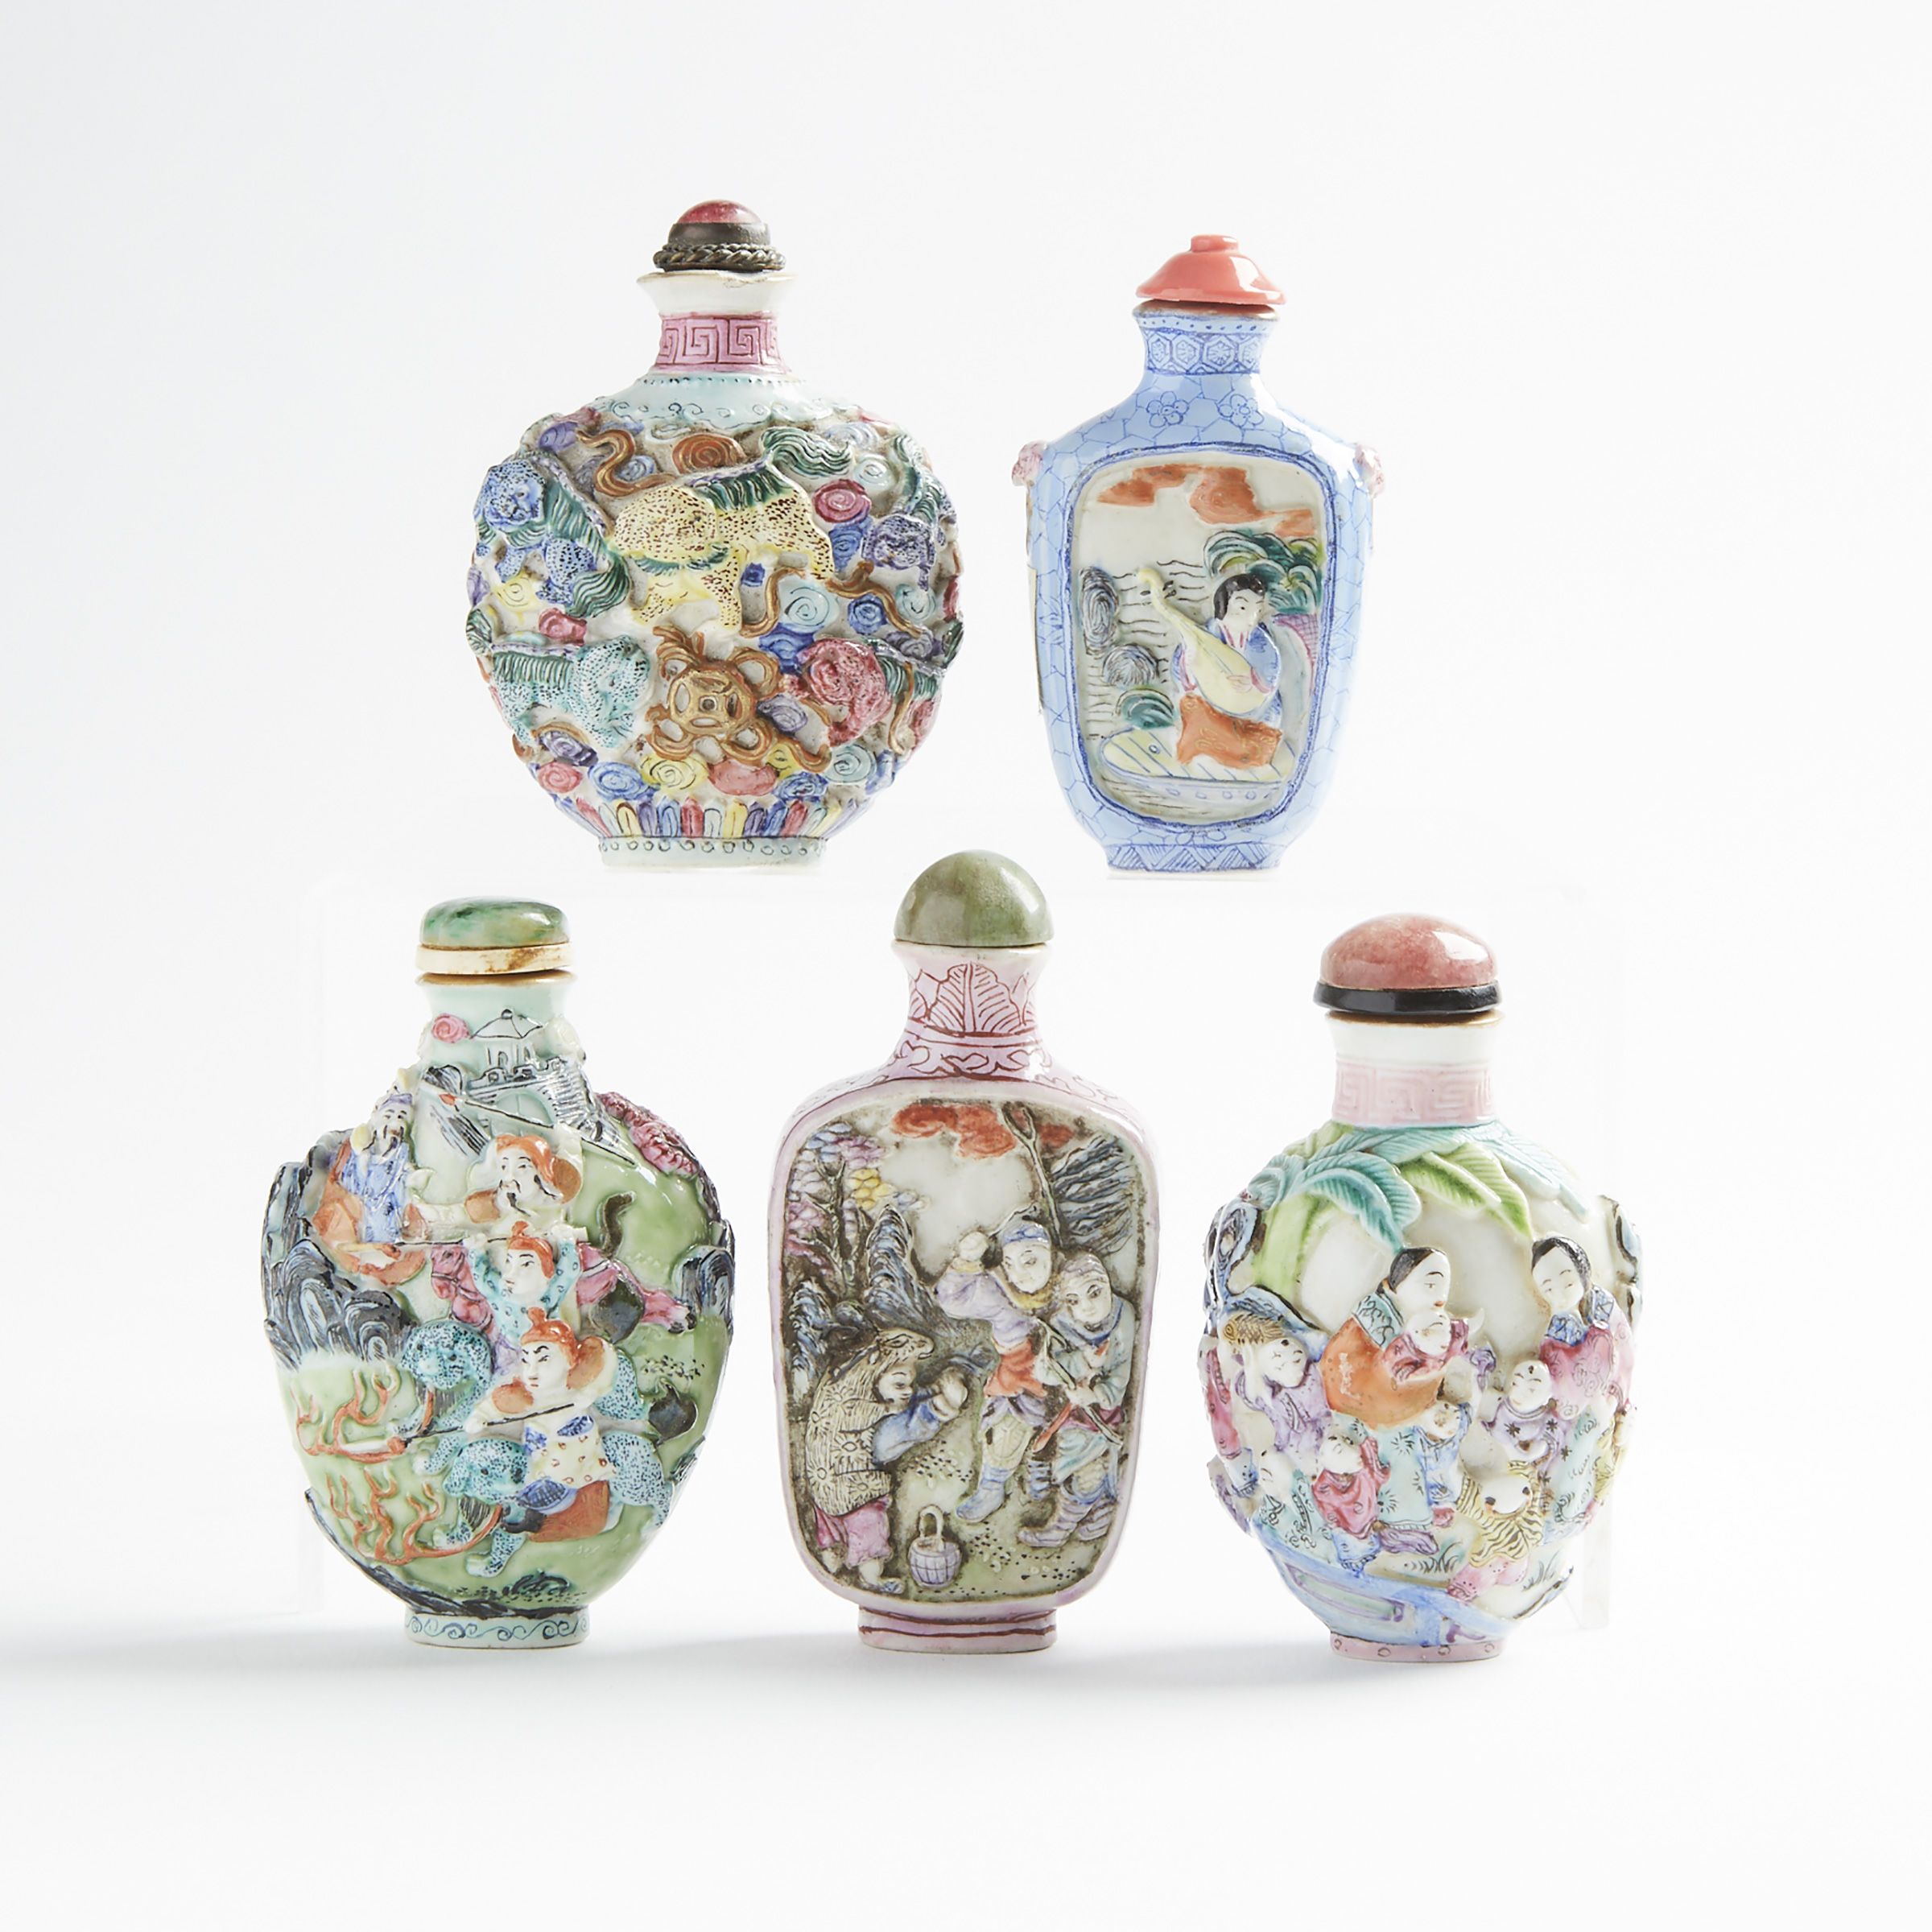 A Group of Five Famille Rose Moulded Snuff Bottles, 19th/Early 20th Century